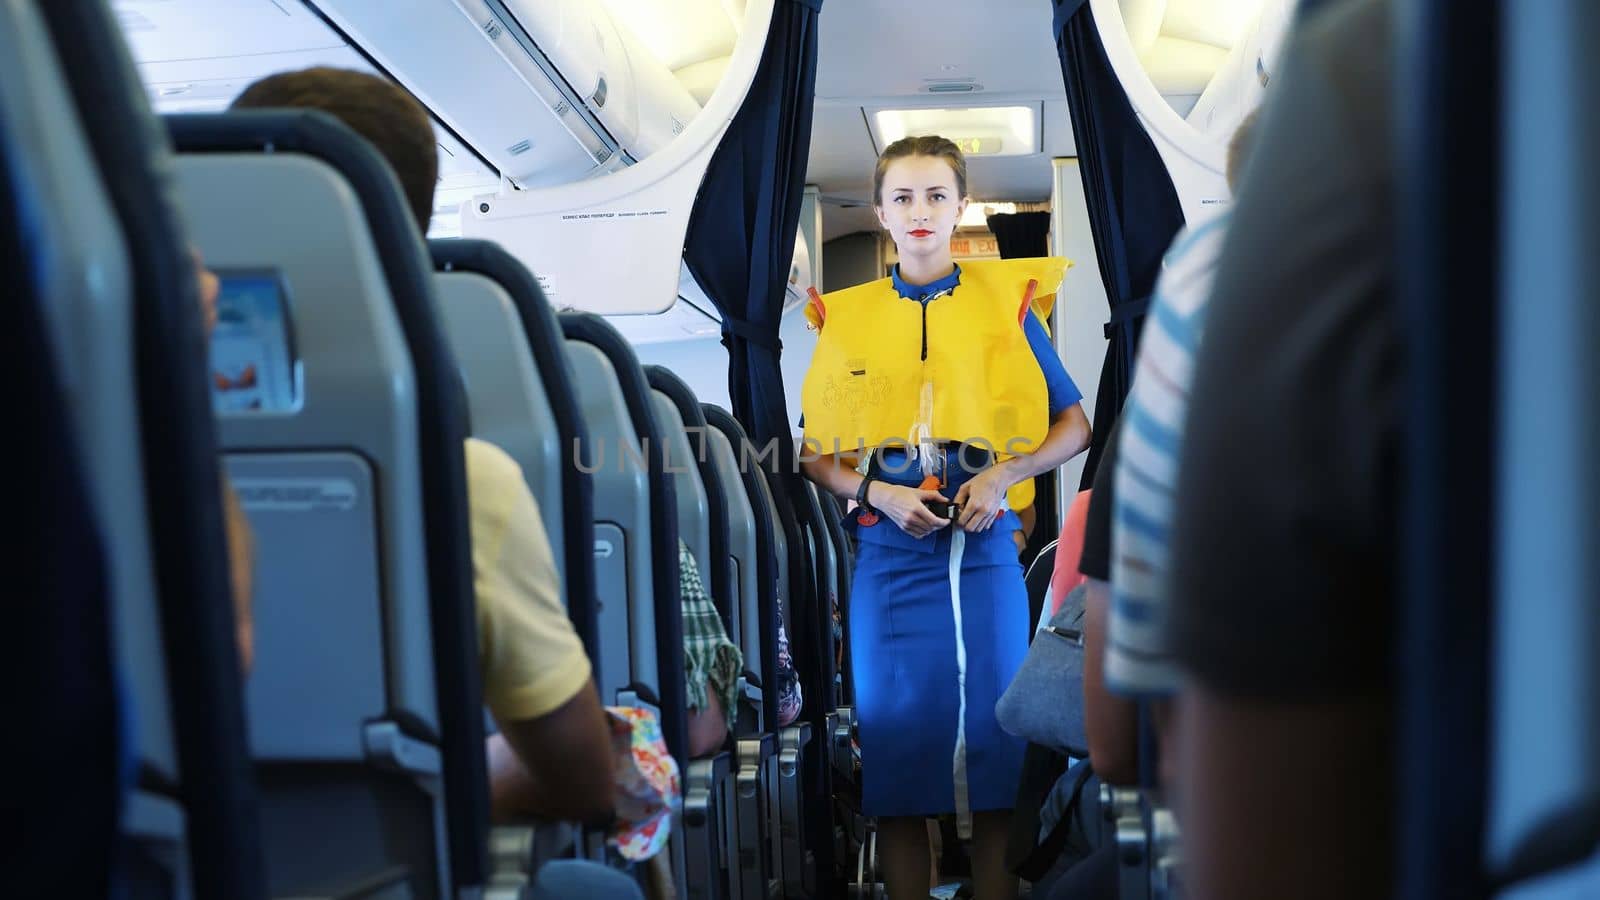 AIRPORT BORYSPIL, UKRAINE - OCTOBER 24, 2018: Ukraine International Airlines. Stewardess in cabin of passenger airplane instructs passengers on safety measures in event of an emergency. High quality photo